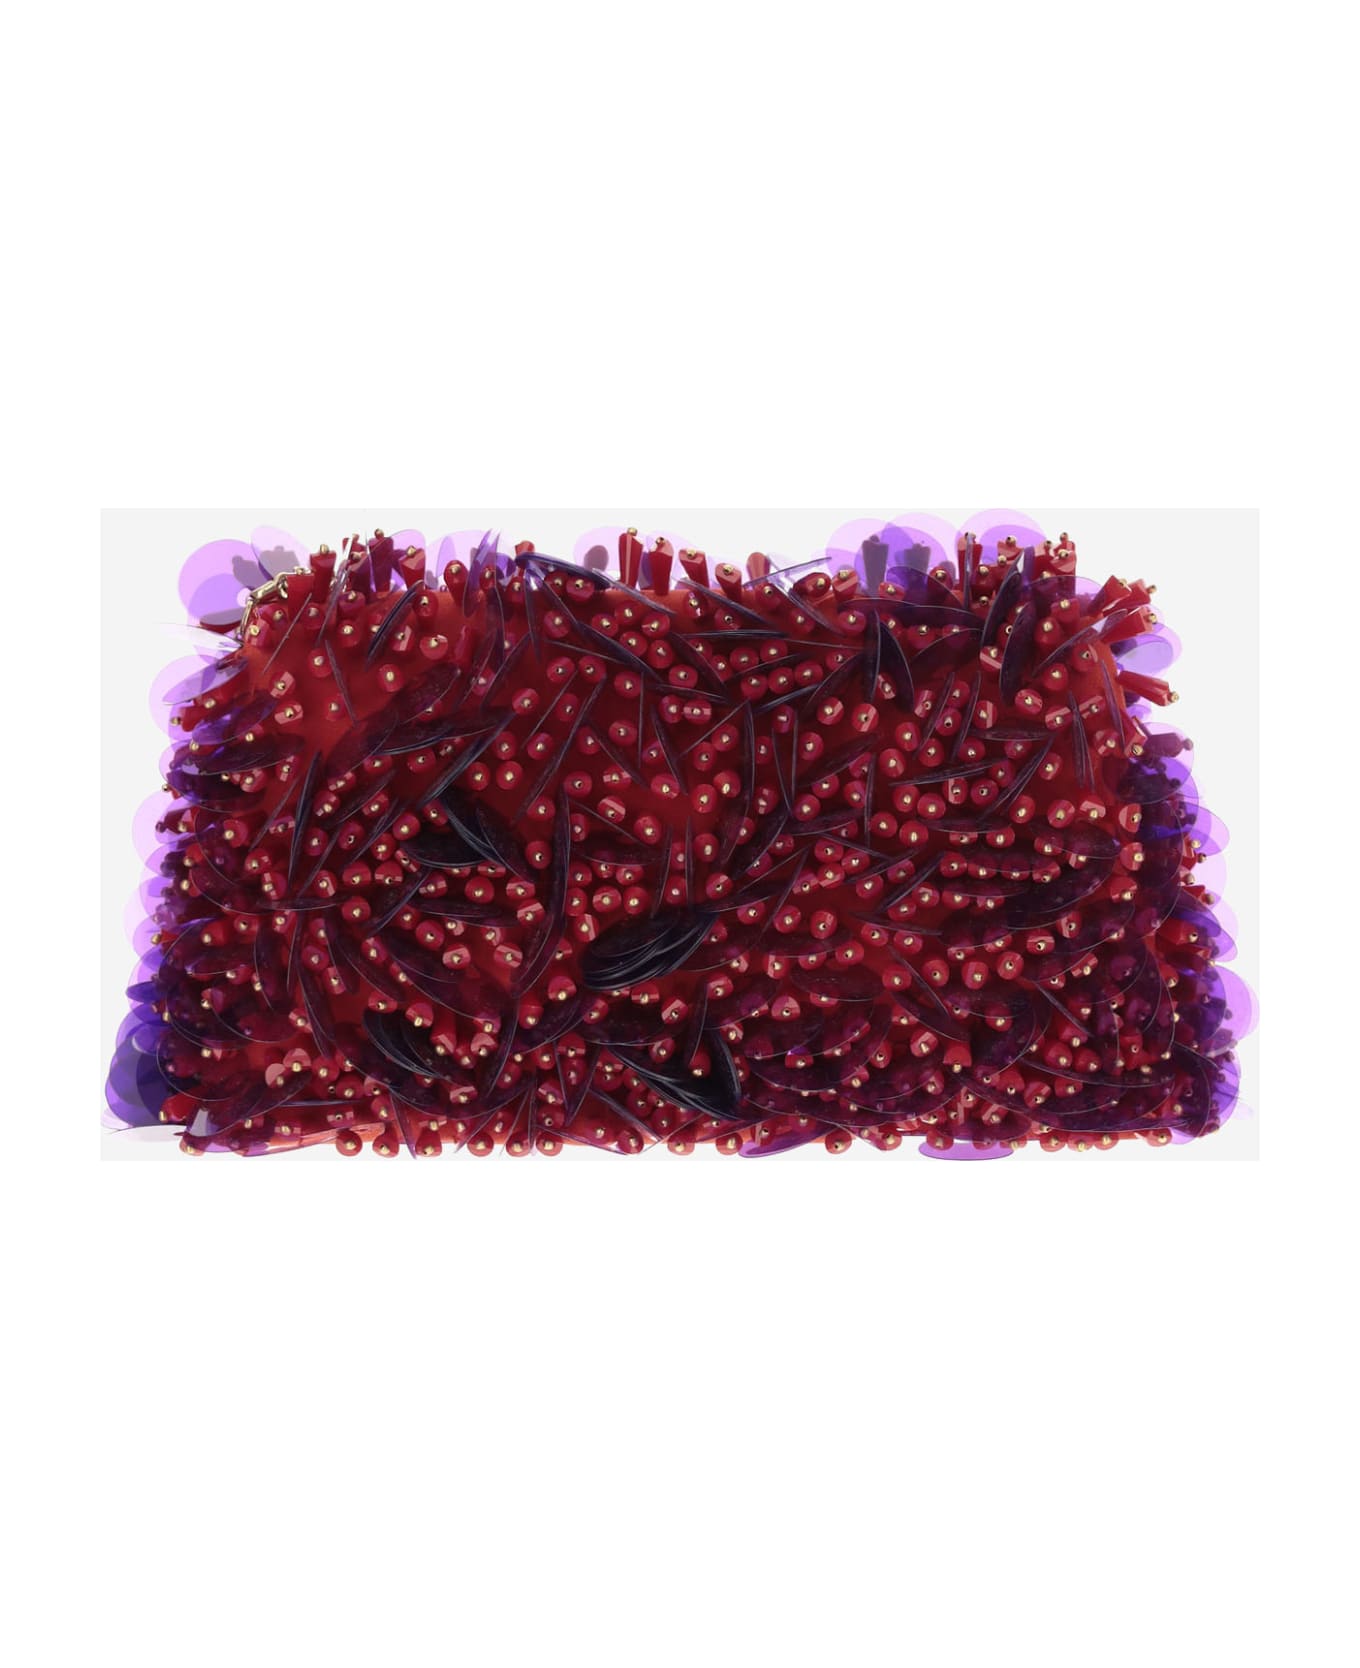 Dries Van Noten Silk Bag With Sequins And Beads - Red